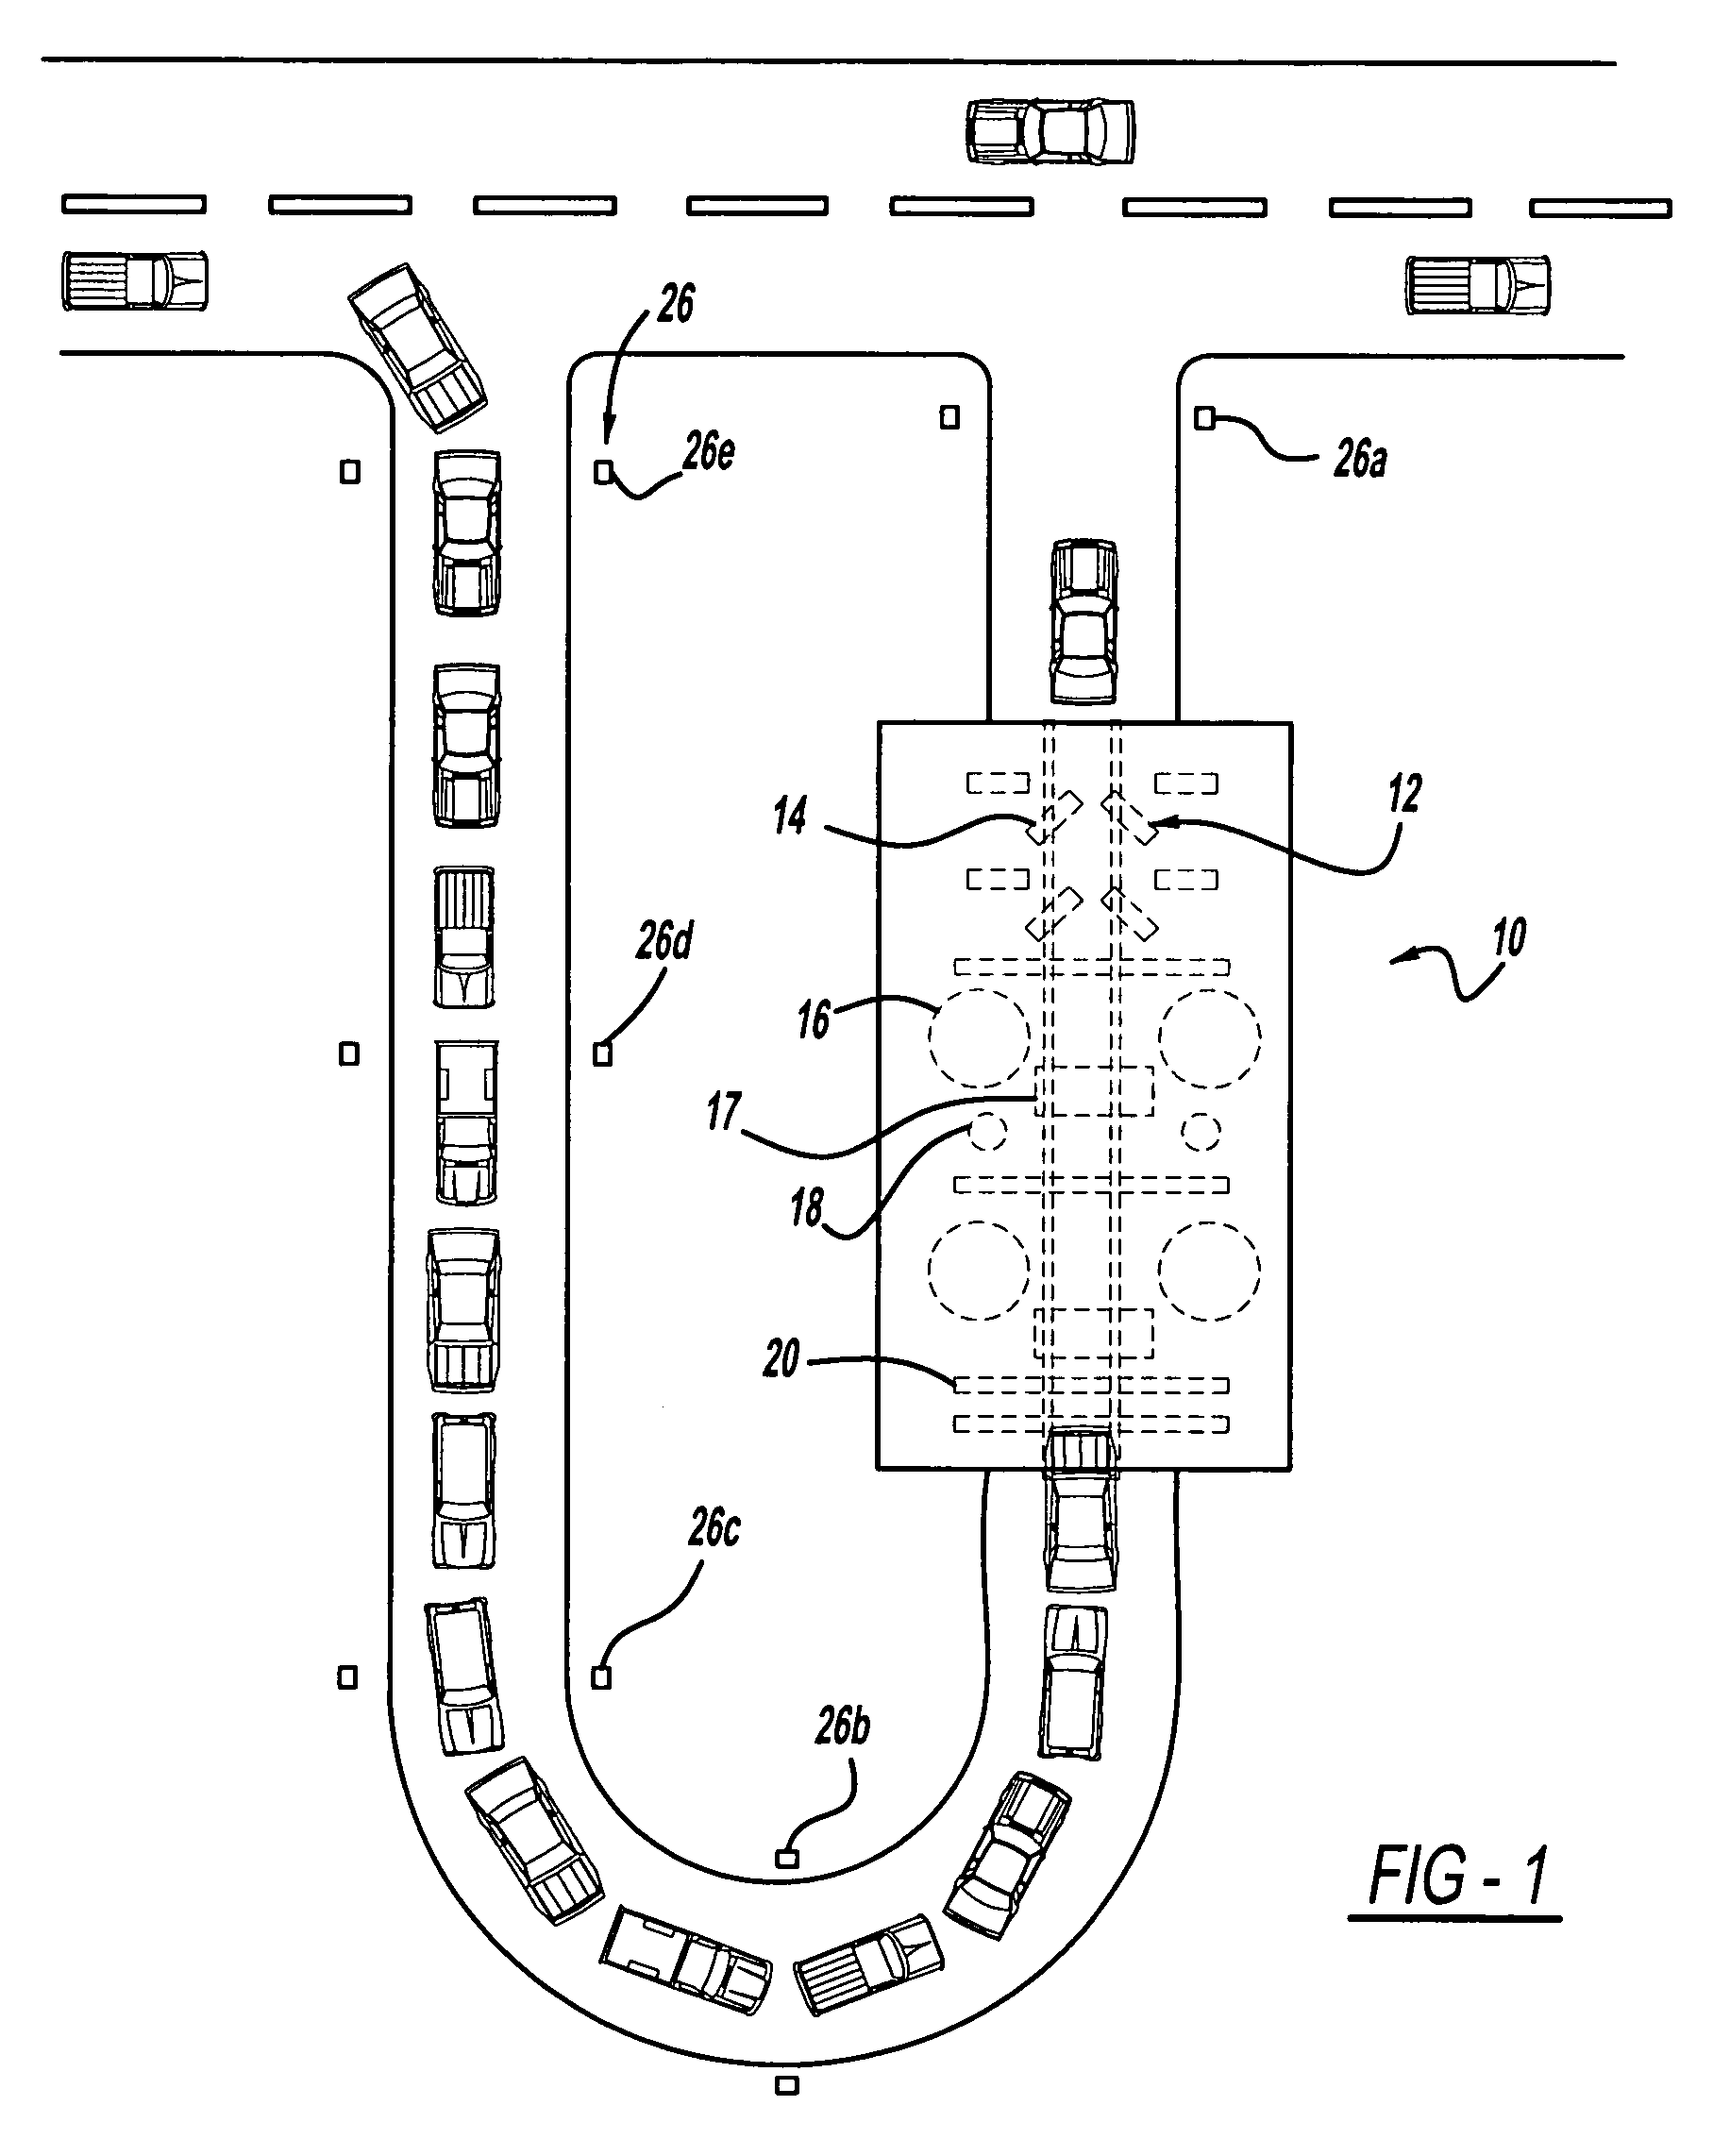 Control system for vehicle washing system